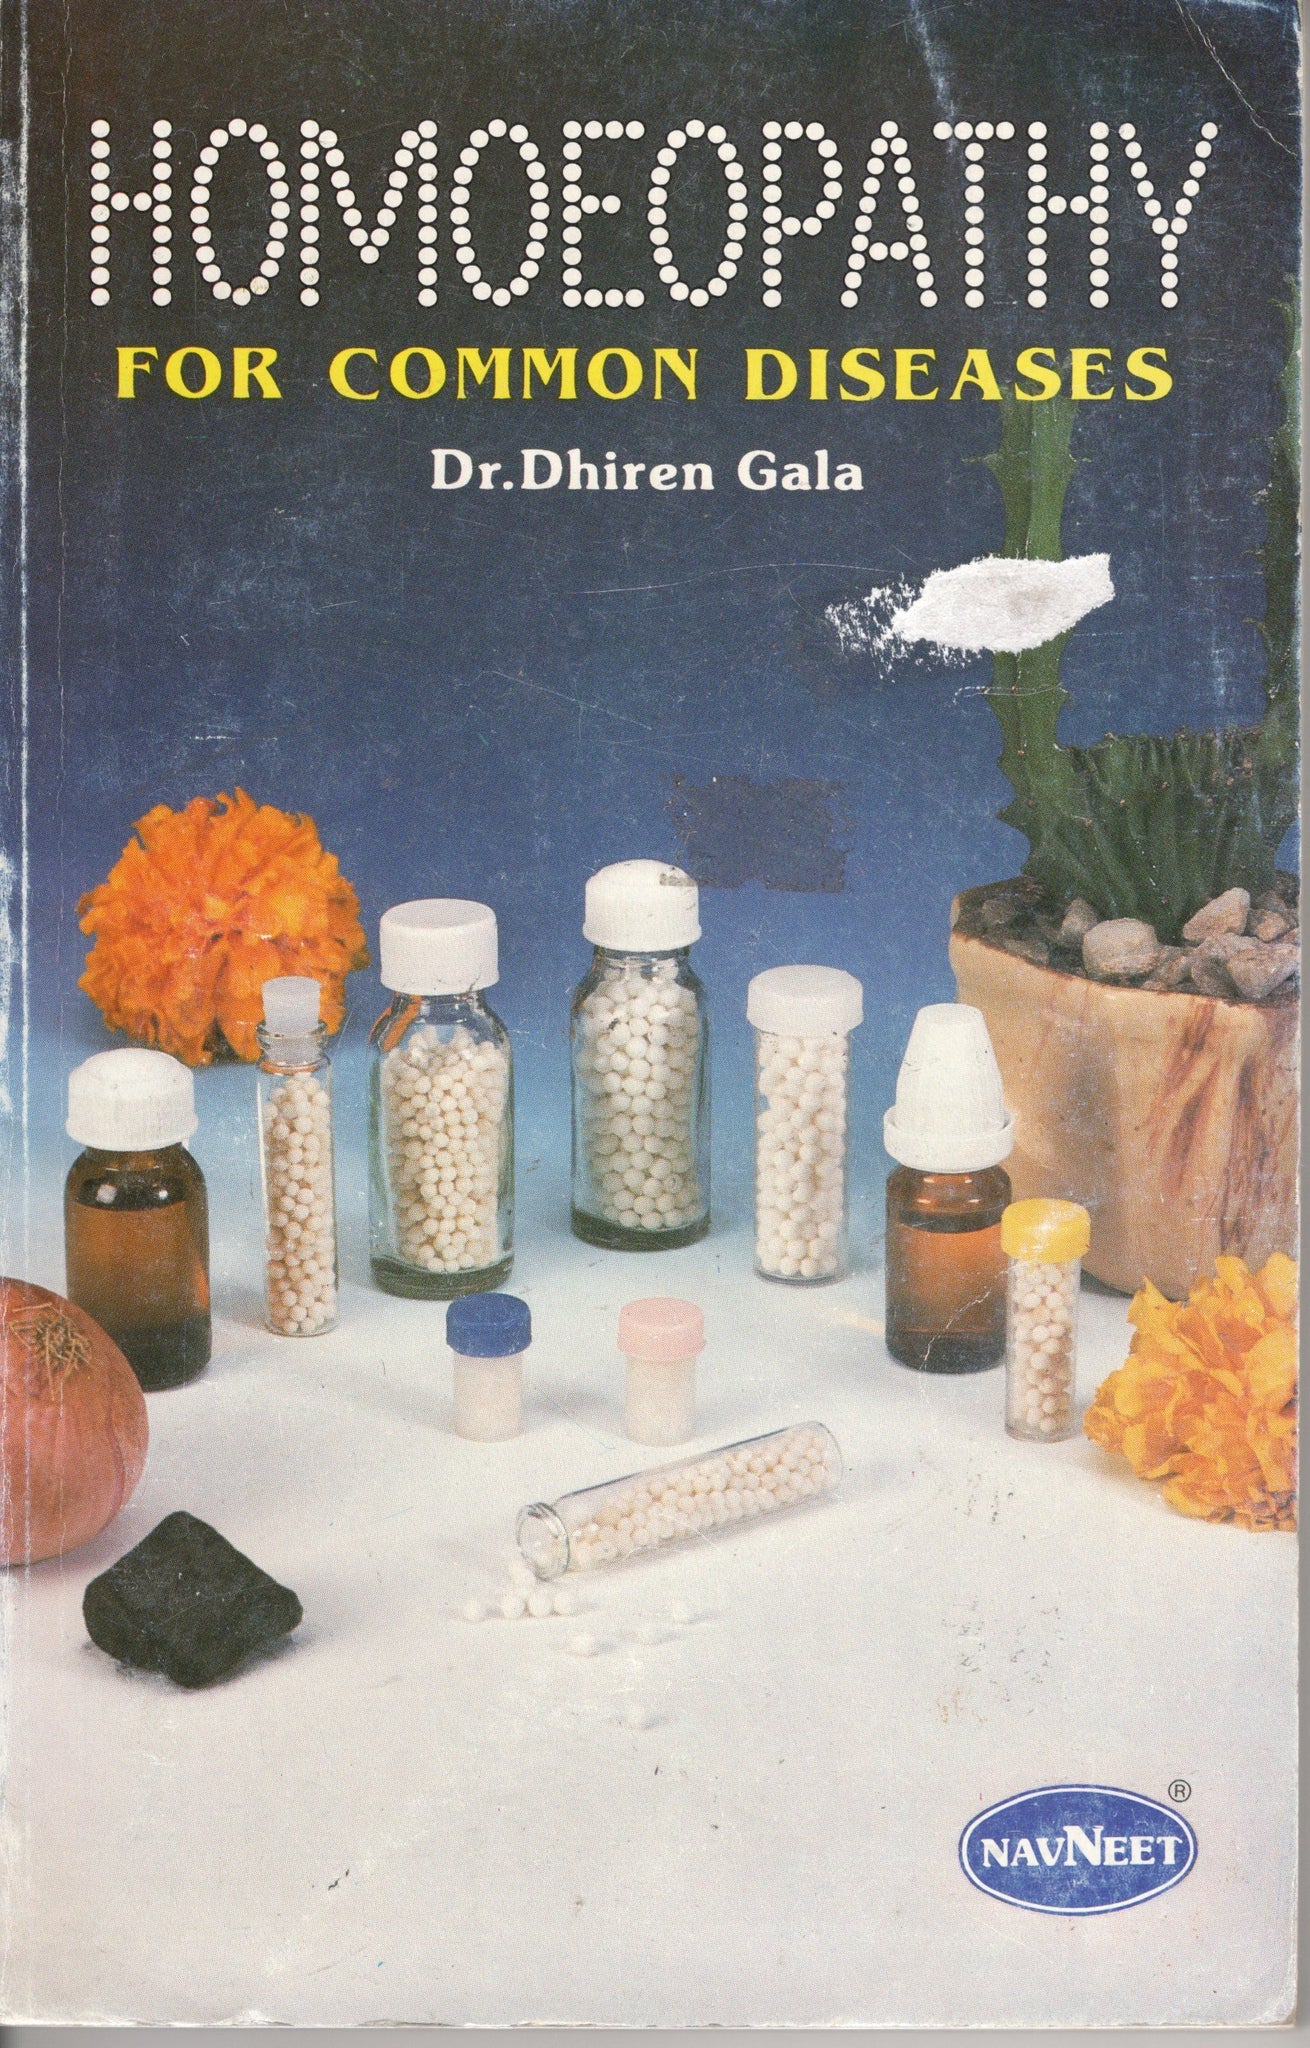 Homeopathy For Common Diseases